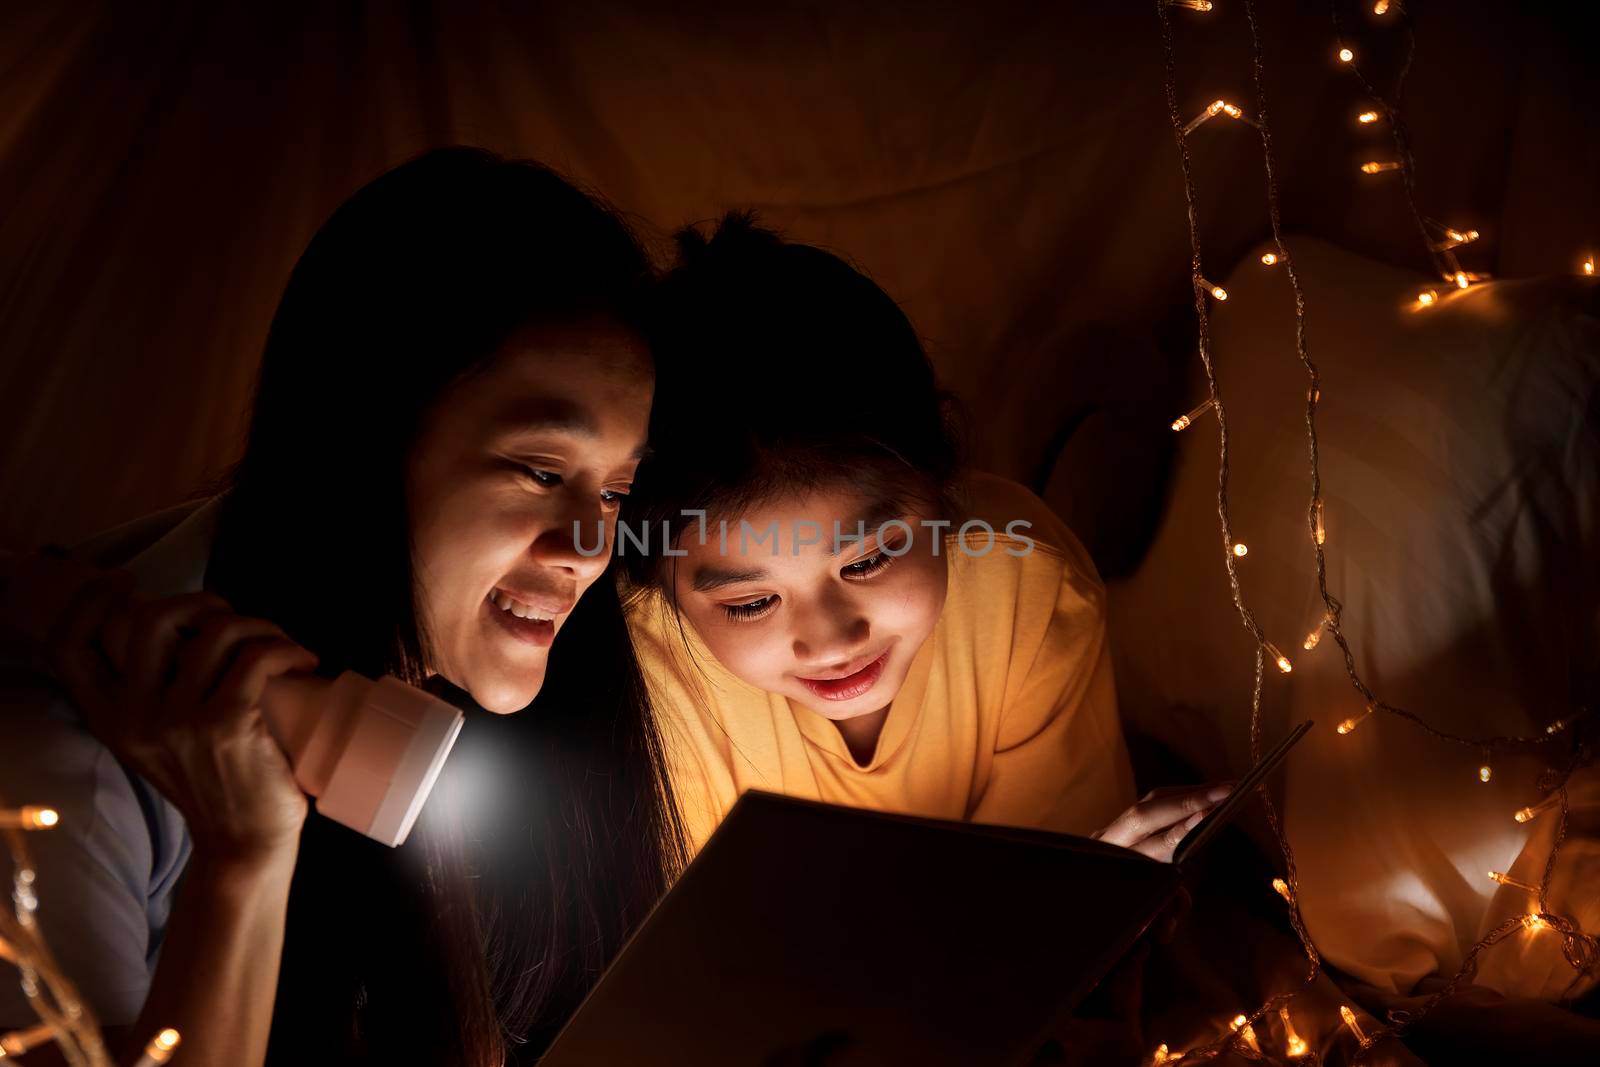 Family concept. elder sister and sister reading book with flashlight together before bedtime. Sister read story book together in bed sheet tent. focus selective little sister. With film grain effect